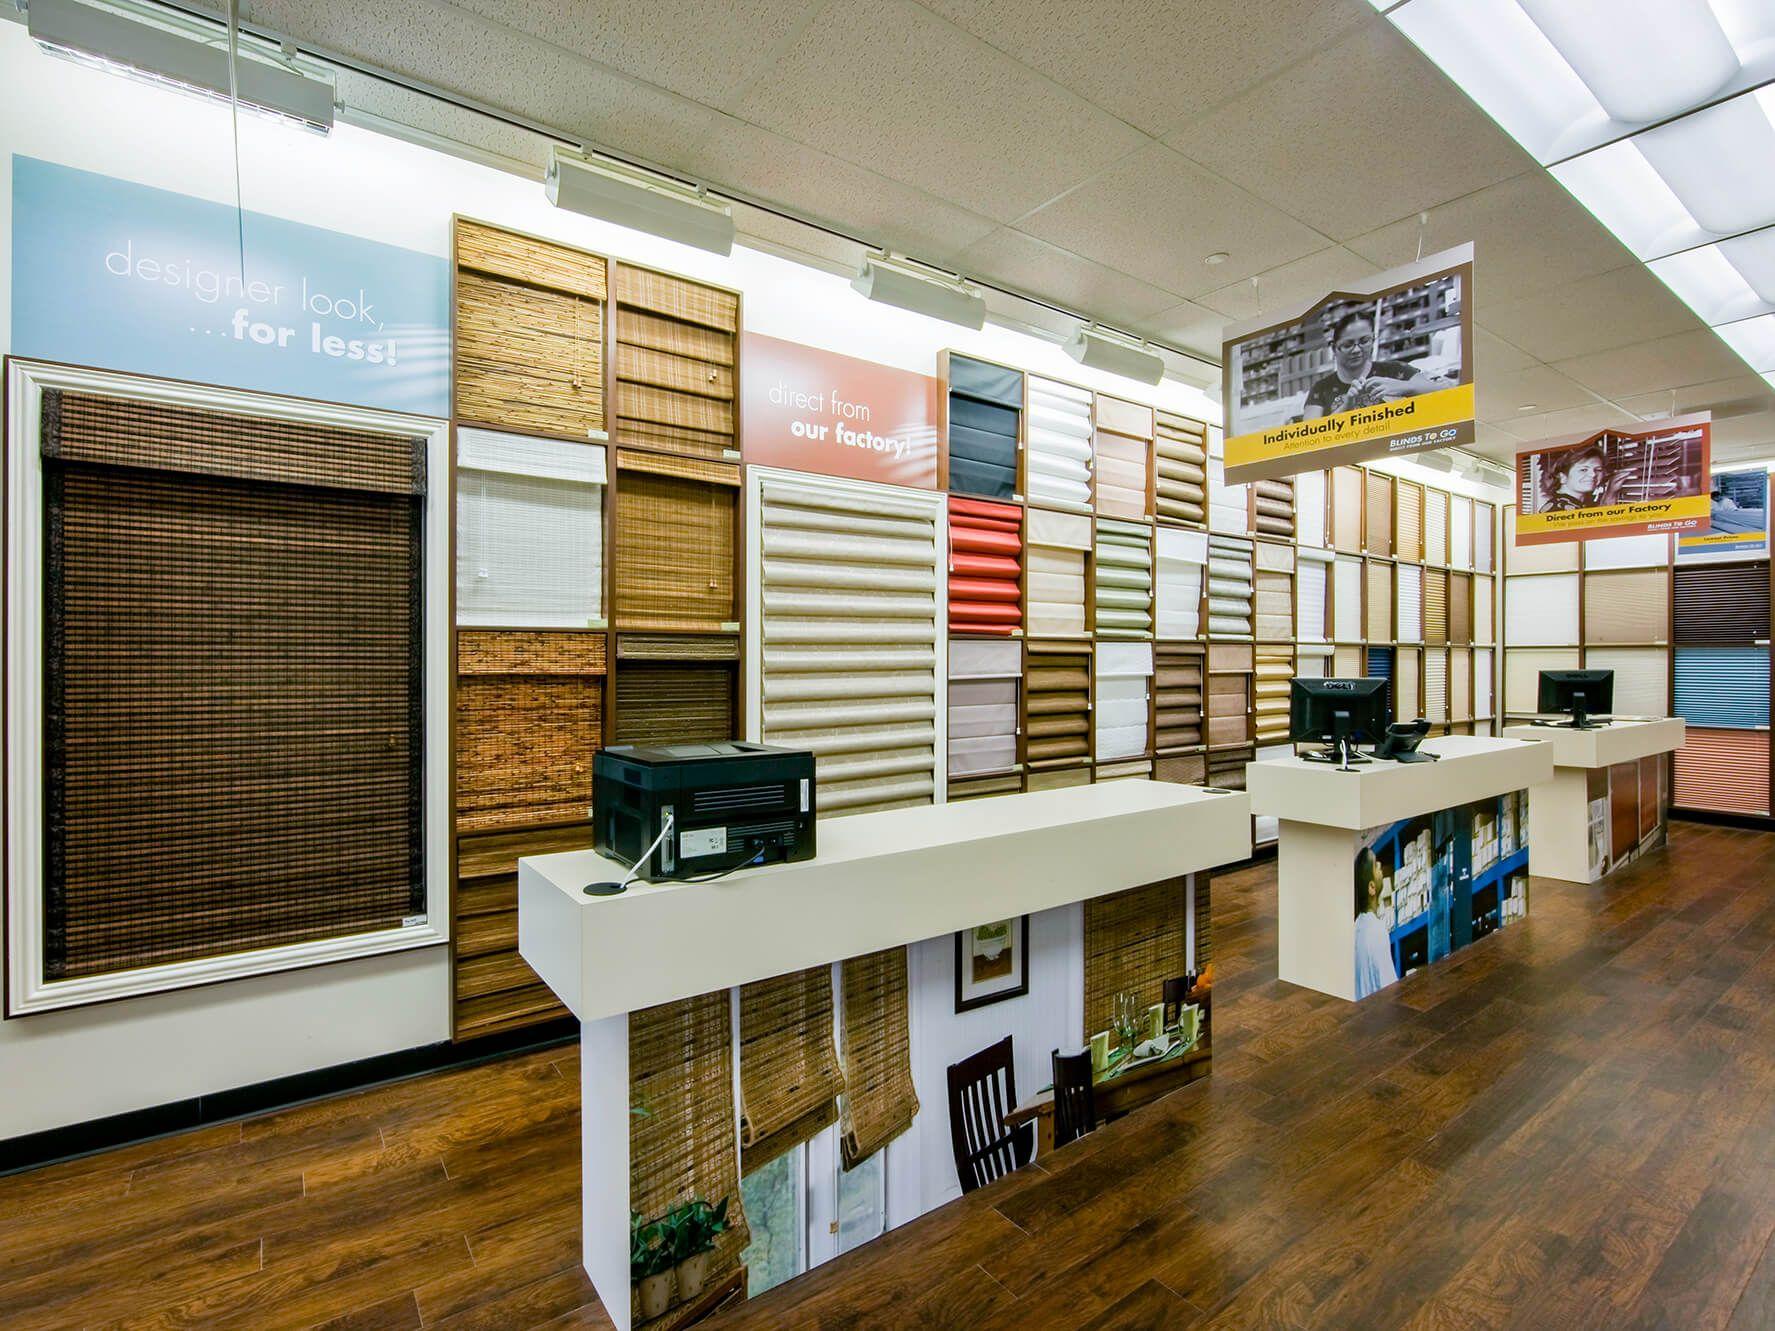 The wall of the Blinds To Go showroom shows a variety of products on display.